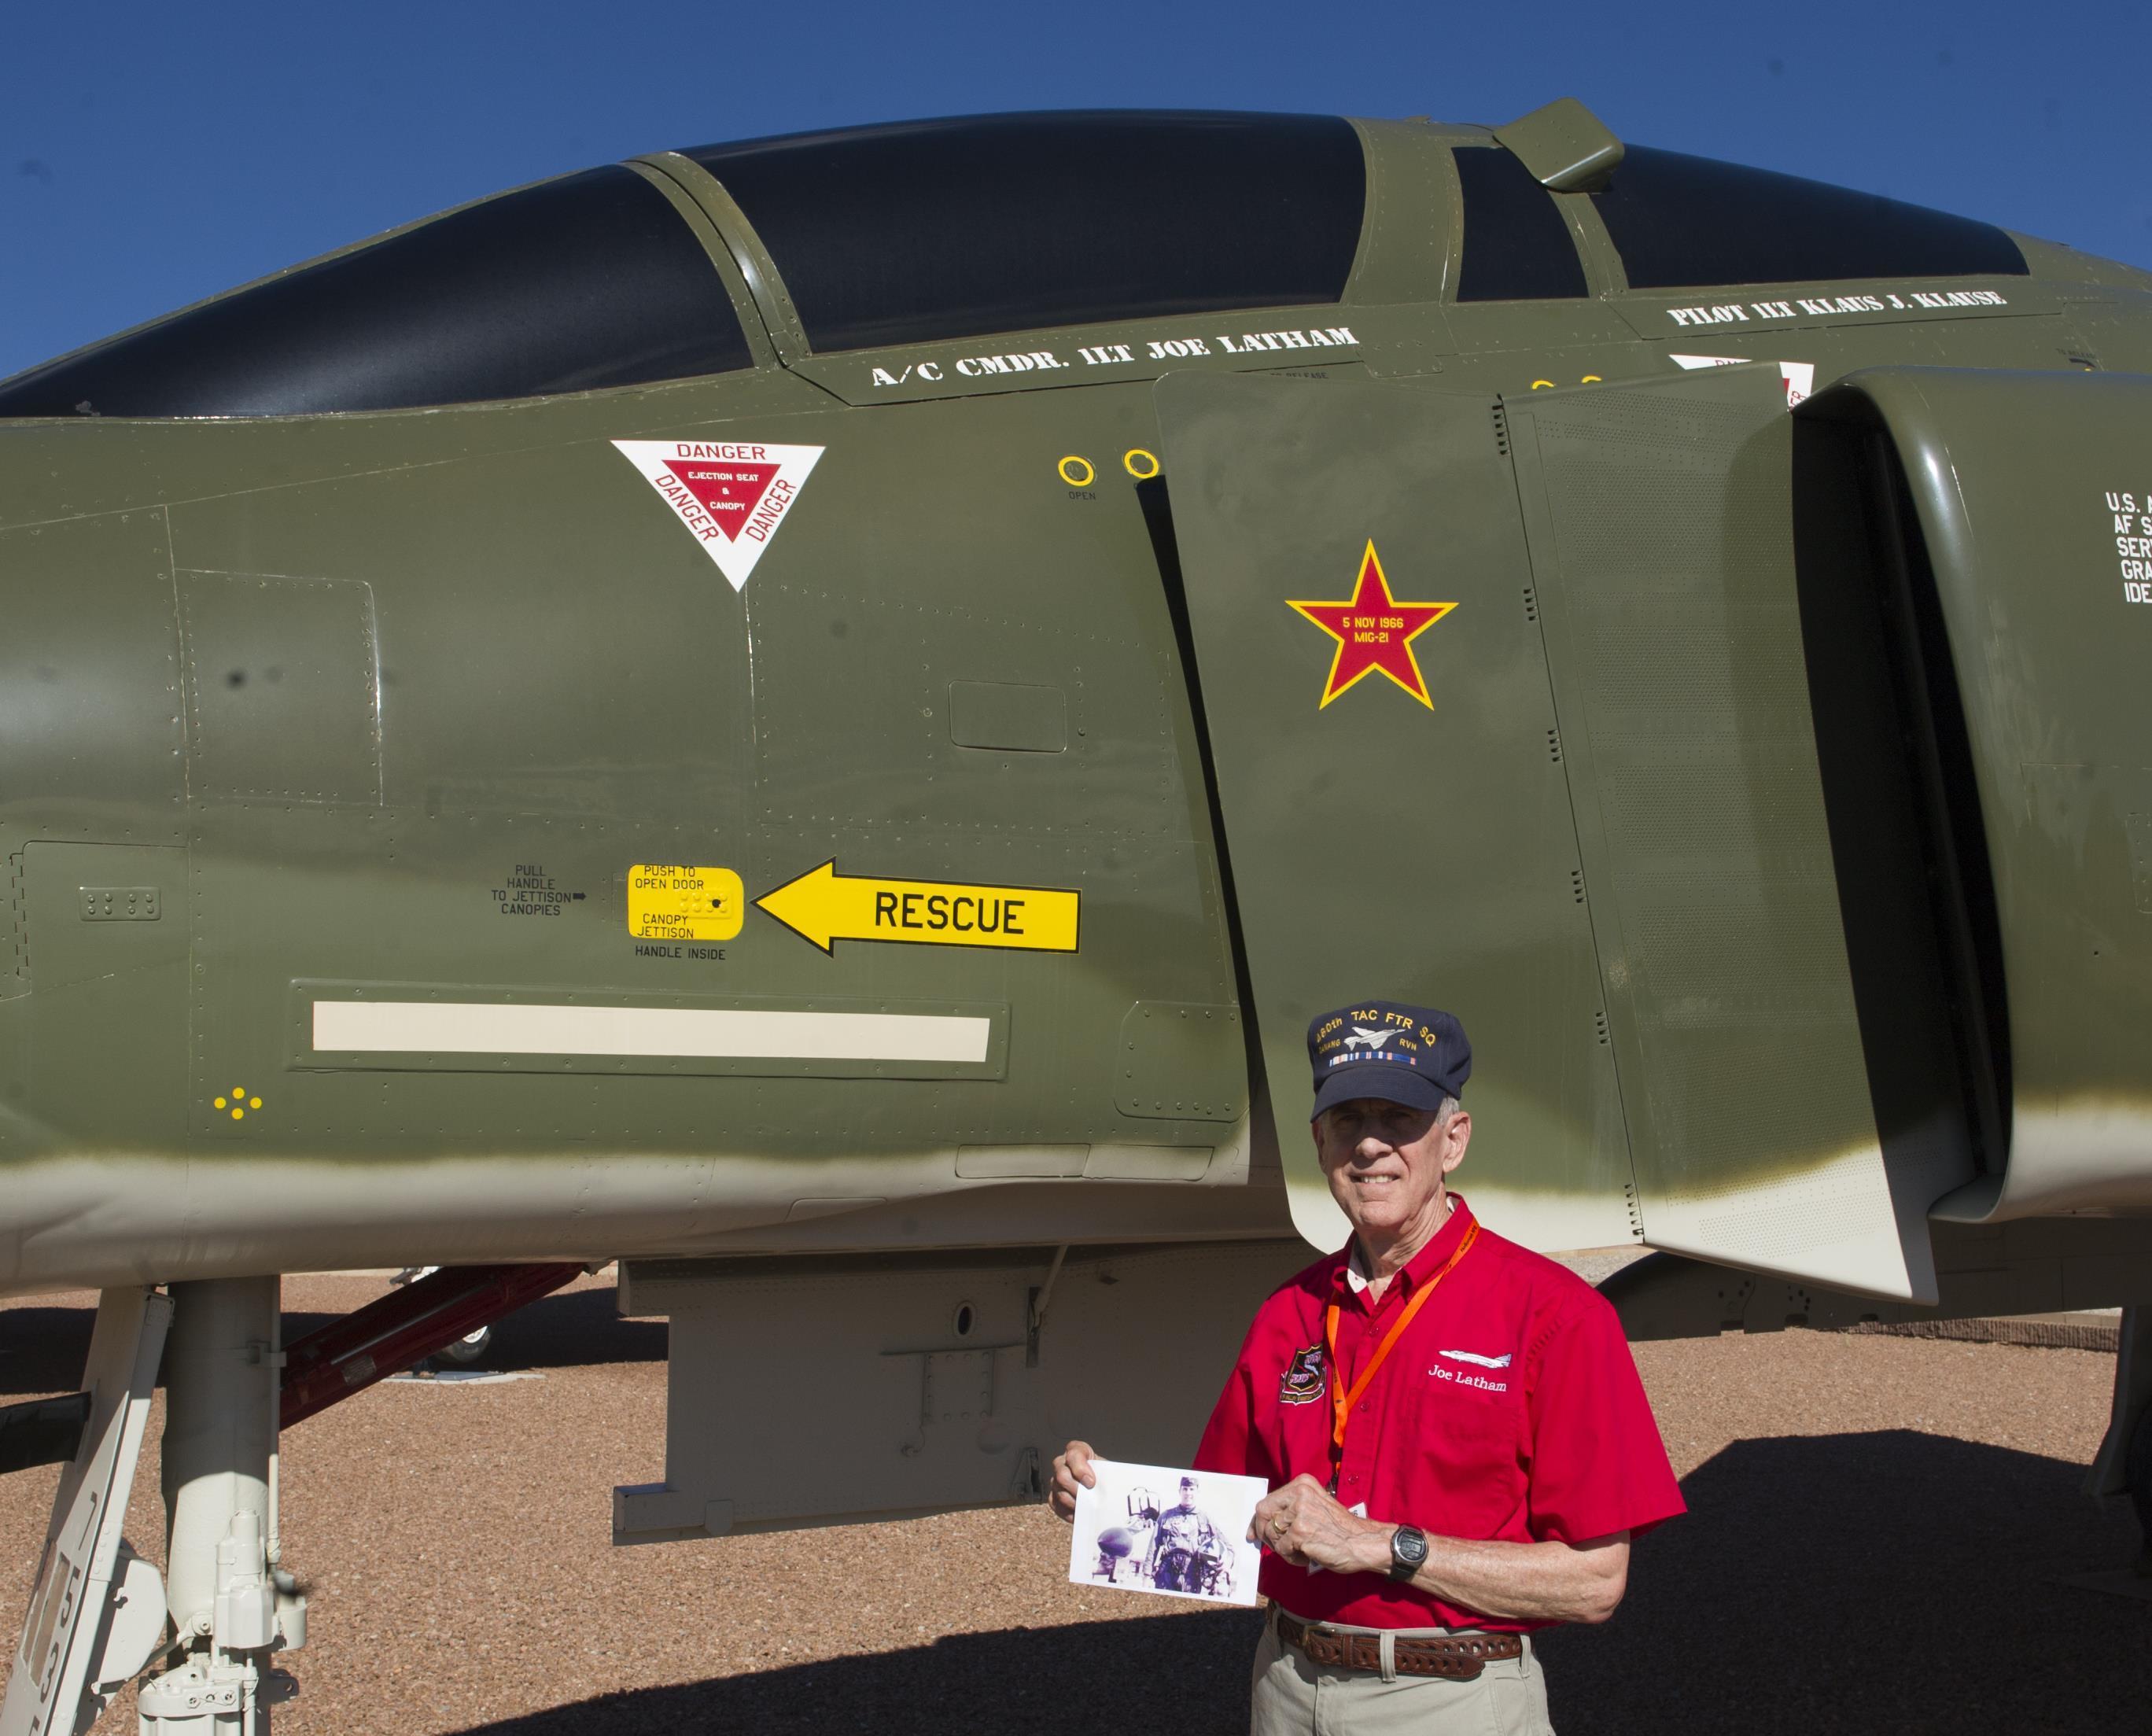 Col. (Ret.) Joe Latham, previously an F-4 Phantom pilot from Holloman Air Force Base, N.M., poses for a picture with an old photo as a first lieutenant in 1966, next to an F-4 adorned with his name Sept. 13, 2016, at Heritage Park, Holloman AFB. Latham’s visit was part of the annual Phantom Society Tour where 160 aircraft enthusiasts, including veterans and non-veterans with aviation backgrounds, toured The tour included an F-16 Fighting Falcon static display and briefing, travel to Holloman’s High Speed Test Track, the opportunity to view QF-4 Phantom IIs and F-16s in flight, and a visit to the base’s heritage park to view static displays of various aircraft historically stationed at Holloman AFB. (U.S. Air Force photo/Master Sgt. Matthew McGovern)